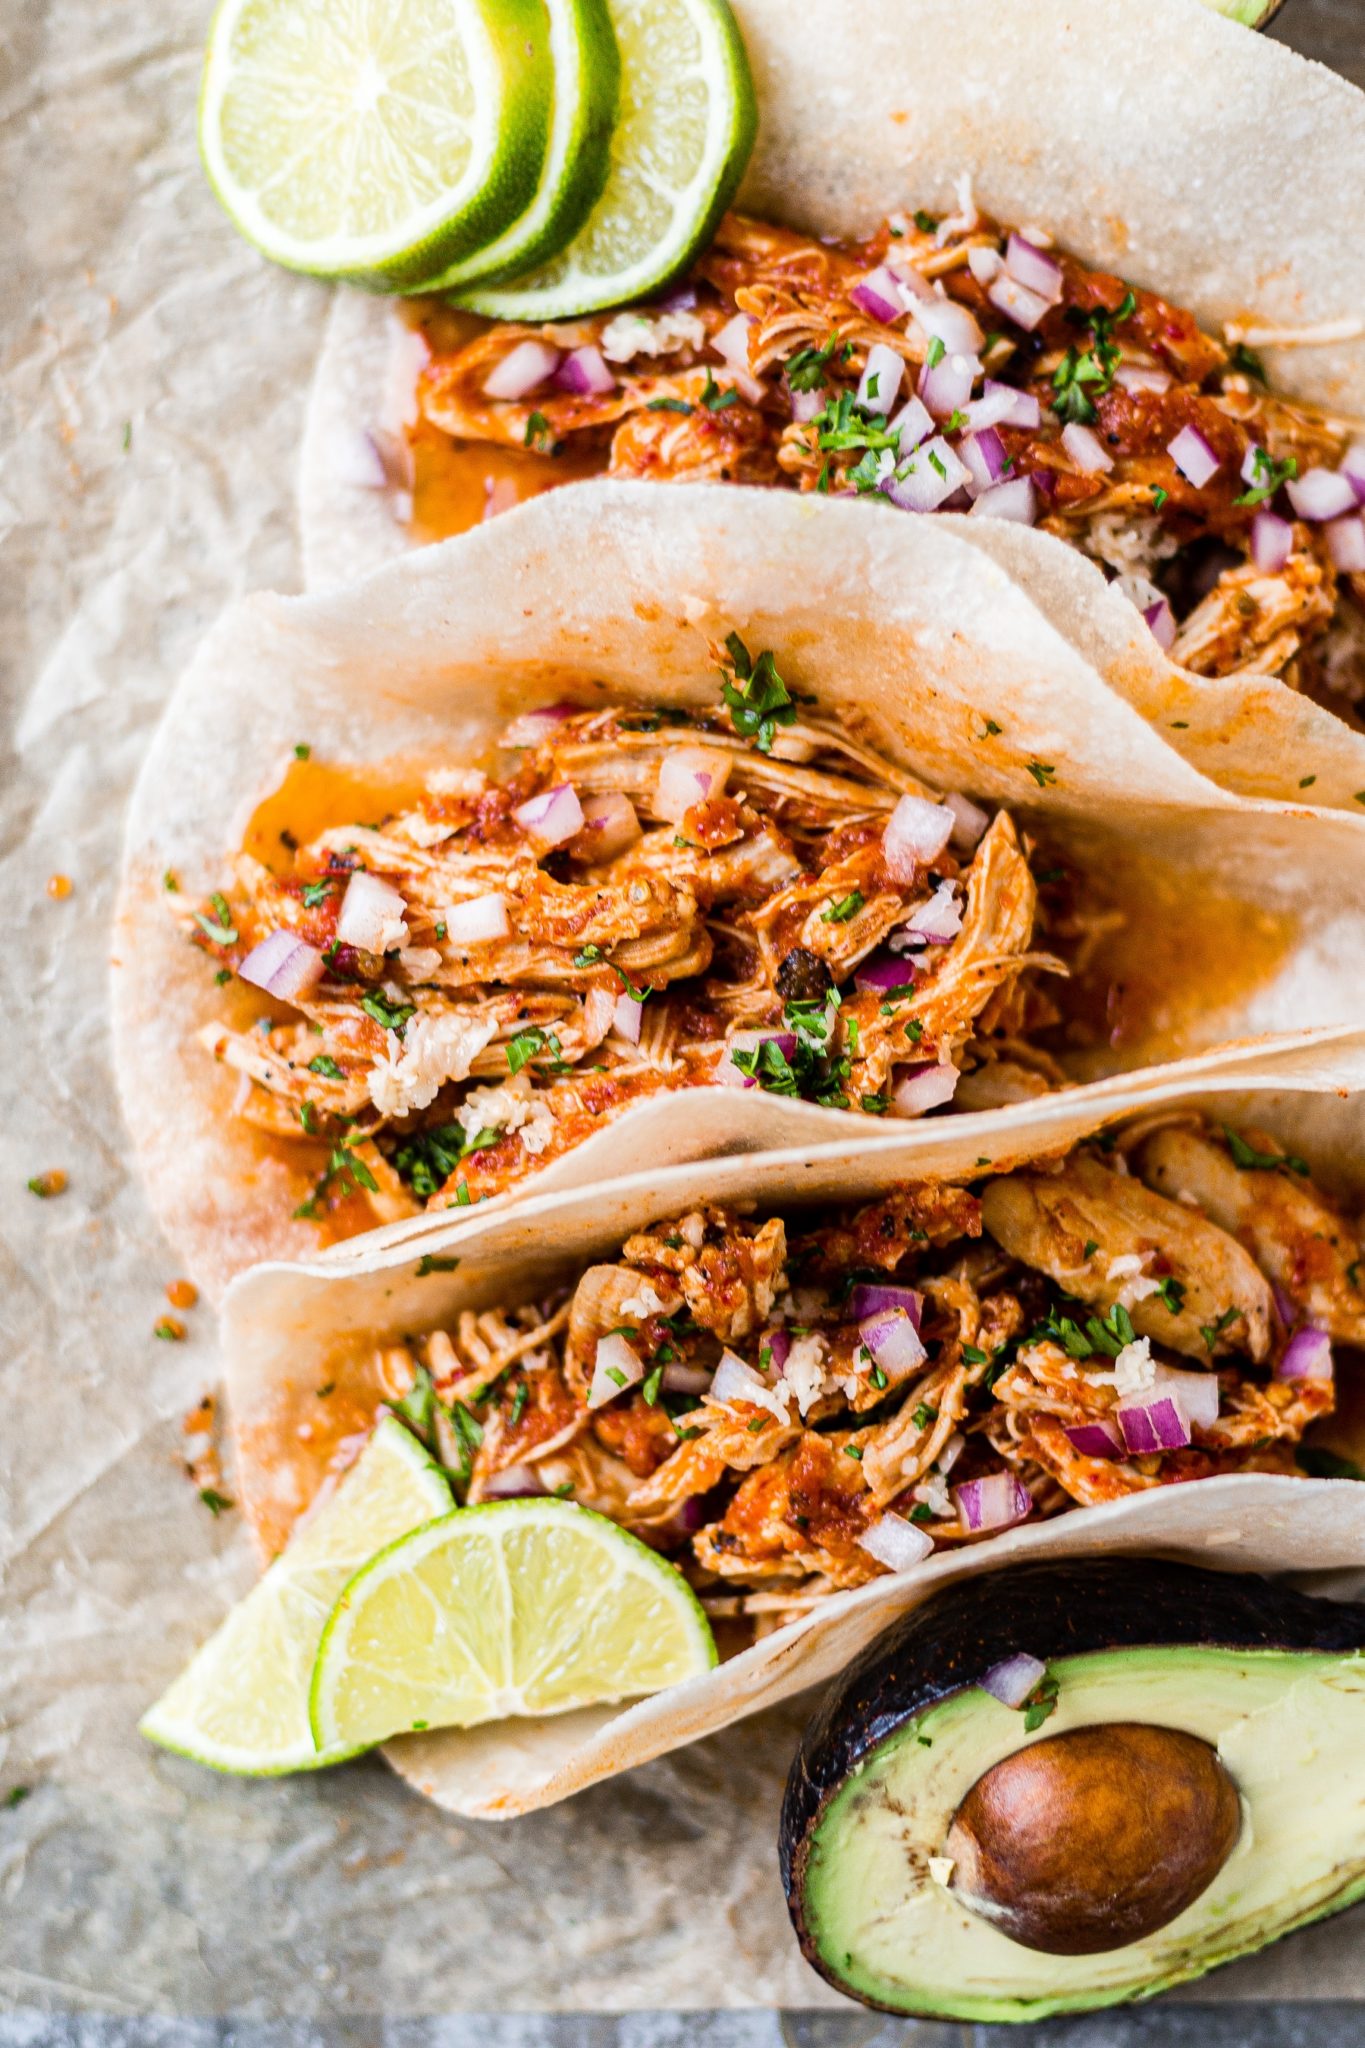 three tacos filled with chicken tinga from the instant pot and topped with fresh lime, onion and cilantro